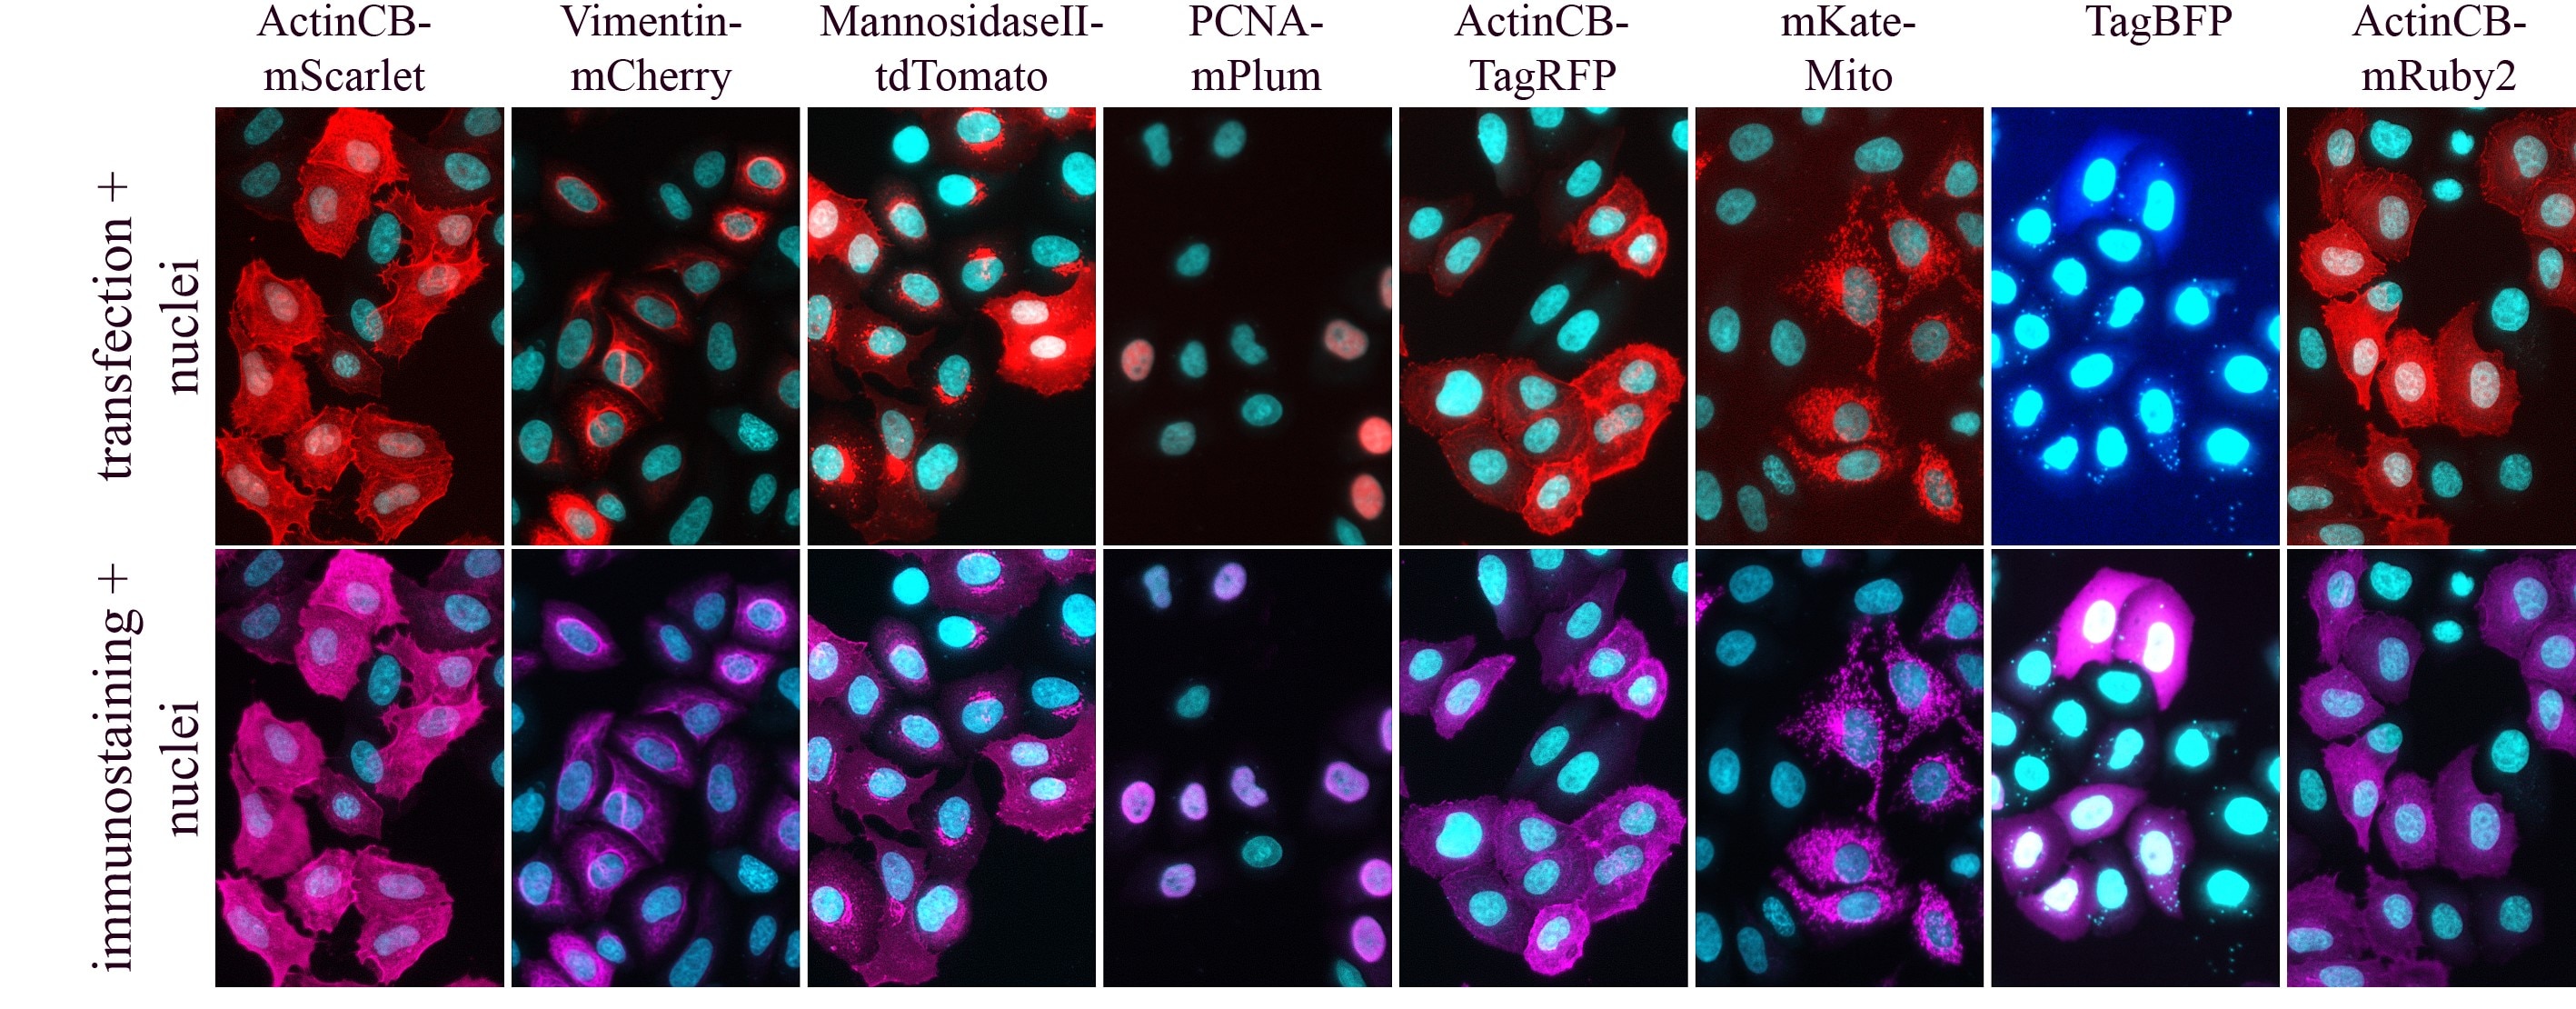 Immunostaining of HeLa cells, transiently transfected with different fluorescent proteins. Primary antibody: pan-RFP (pabr1) 1:800  for 1 h RT. Secondary: goat anti-rabbit. Upper row shows the innate signals from transfected fluorescent proteins, nuclei are in cyan. Lower row shows the signals from immunostainings with pan-RFP (pabr1) antibody, nuclei are in cyan. Pan-RFP (pabr1) can be used for IF detection of mScarlet, mCherry, tdTomato, mPlum, TagRFP, mKate TagBFP, mRuby2.